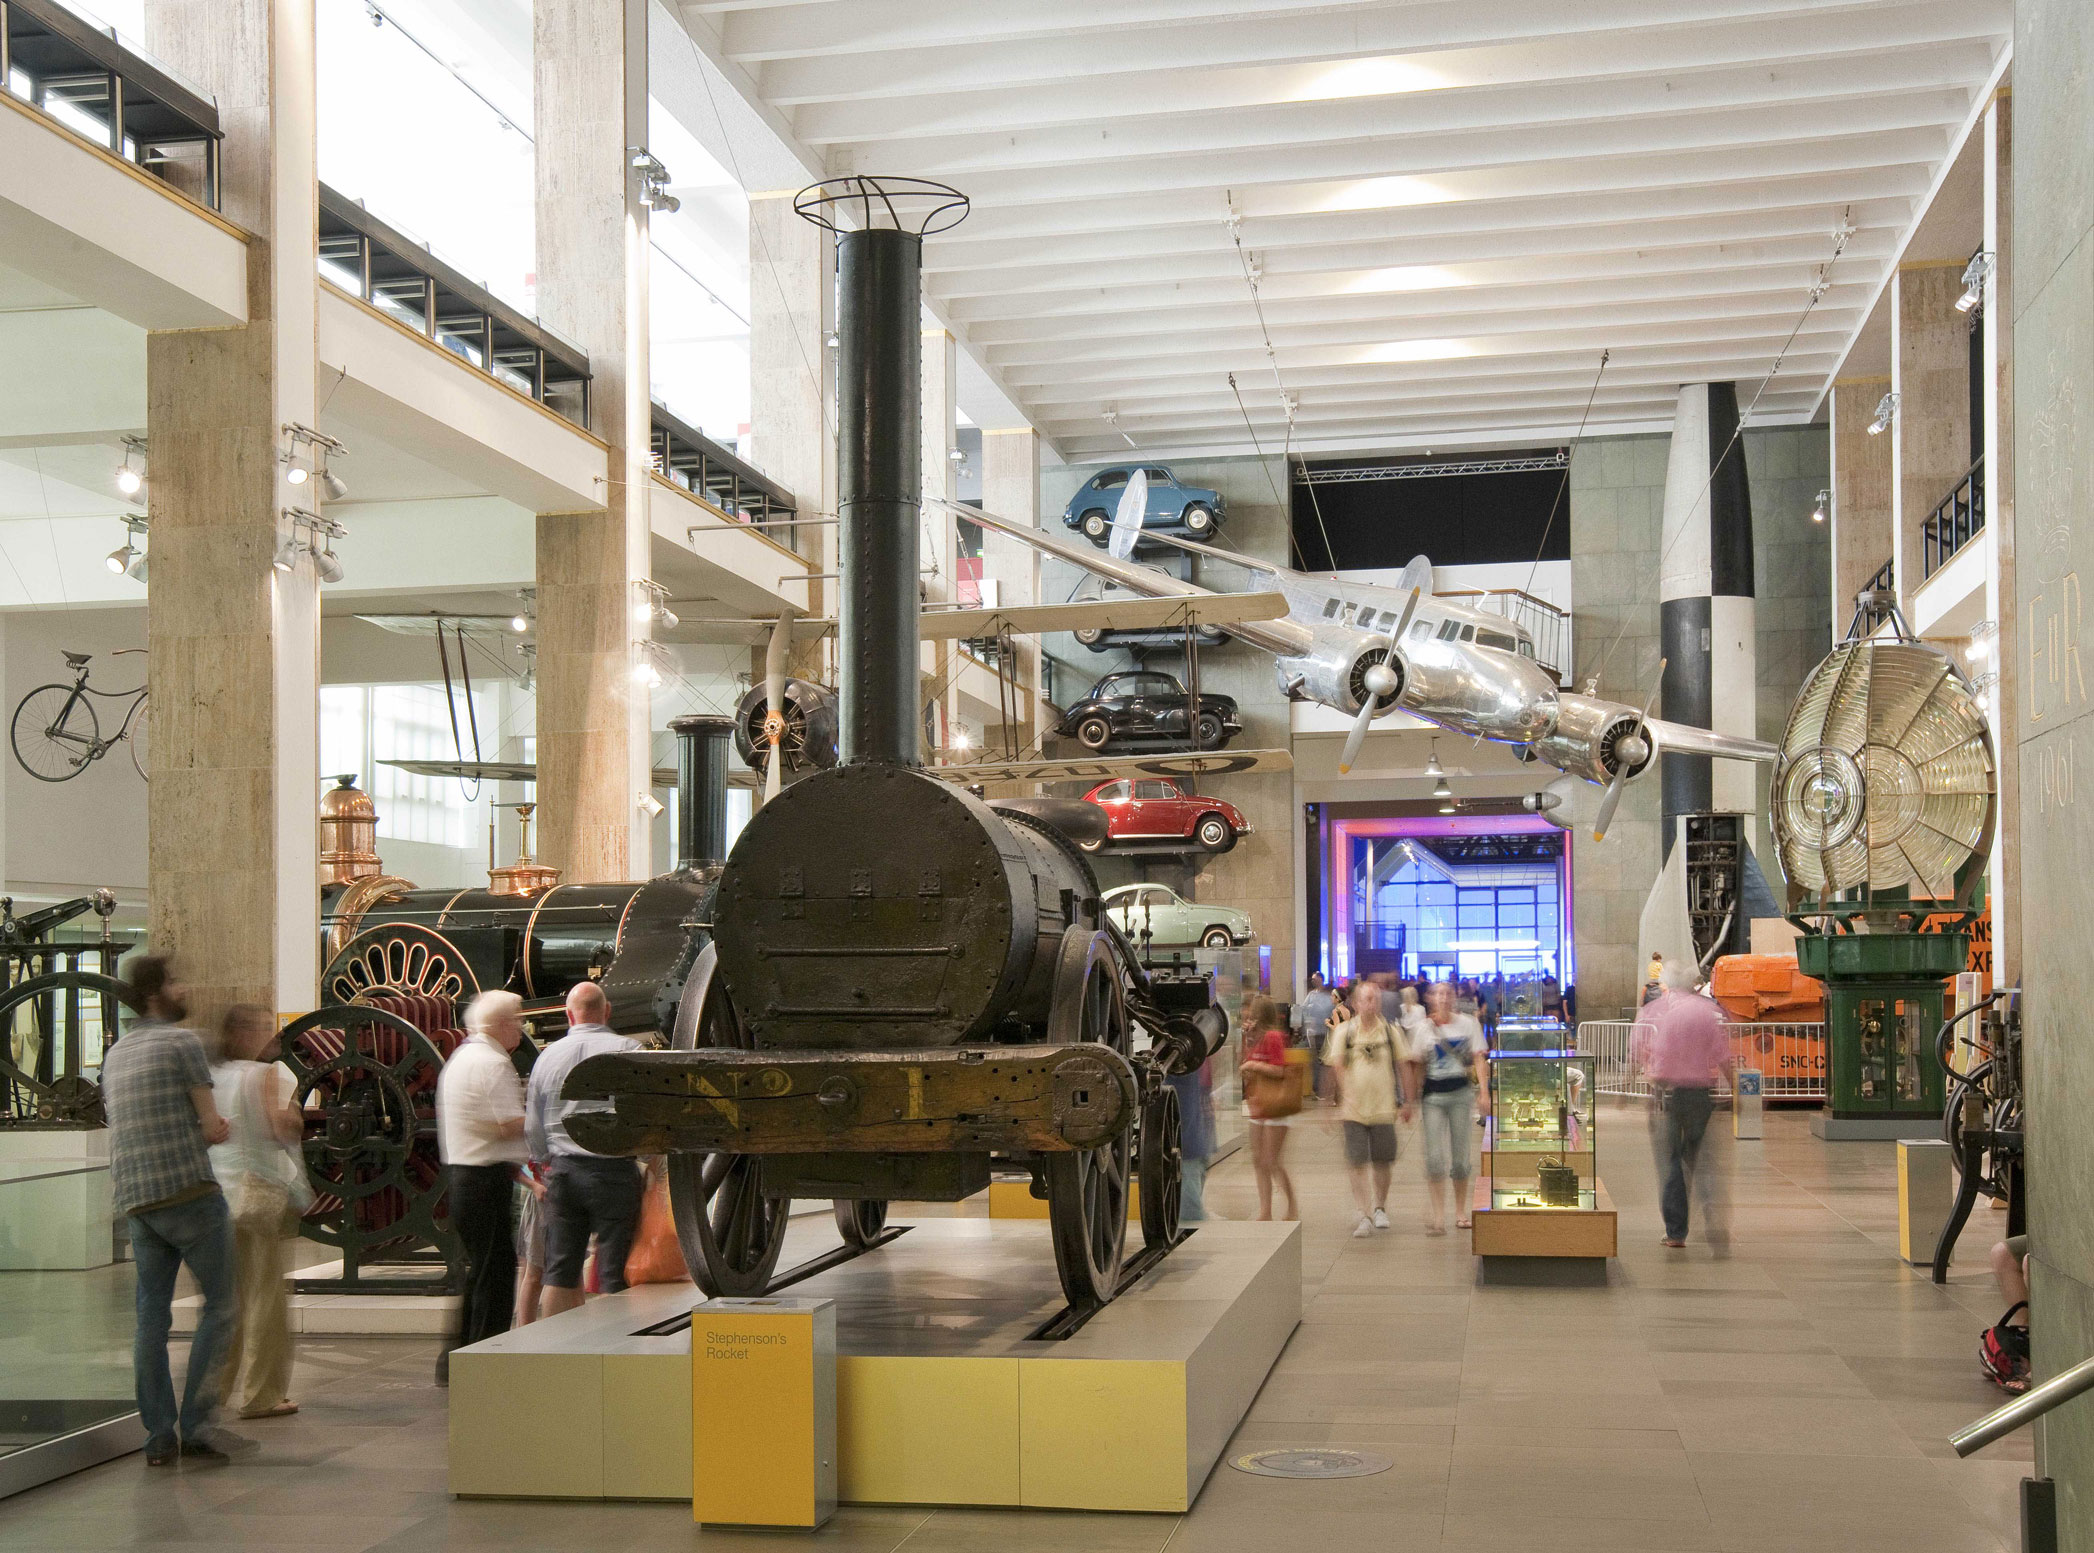 Stephenson's Rocket, on display in the Making the Modern World gallery. Credit: Science Museum 